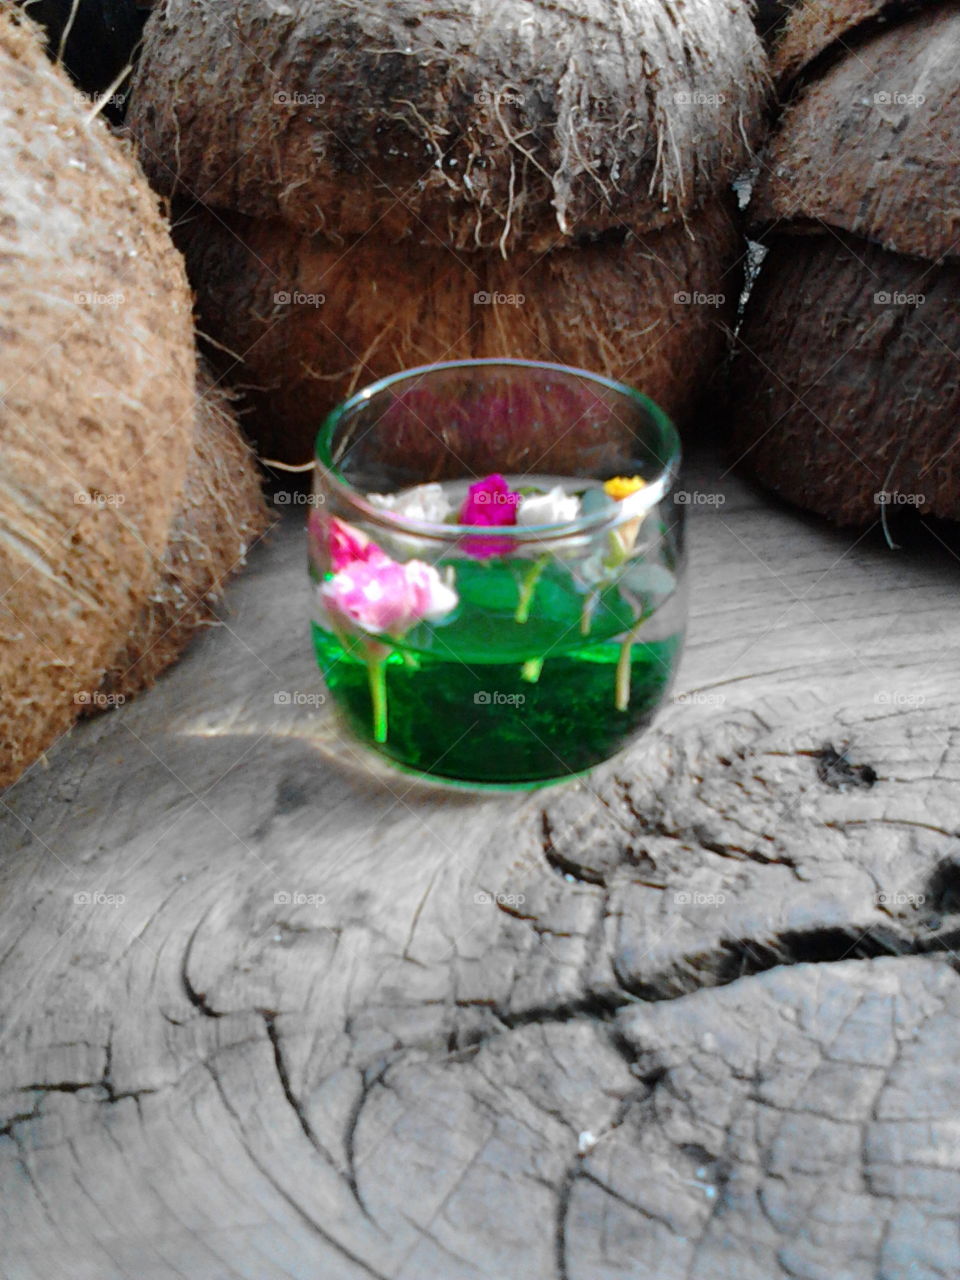 flower in the glass and coconut shell behind it